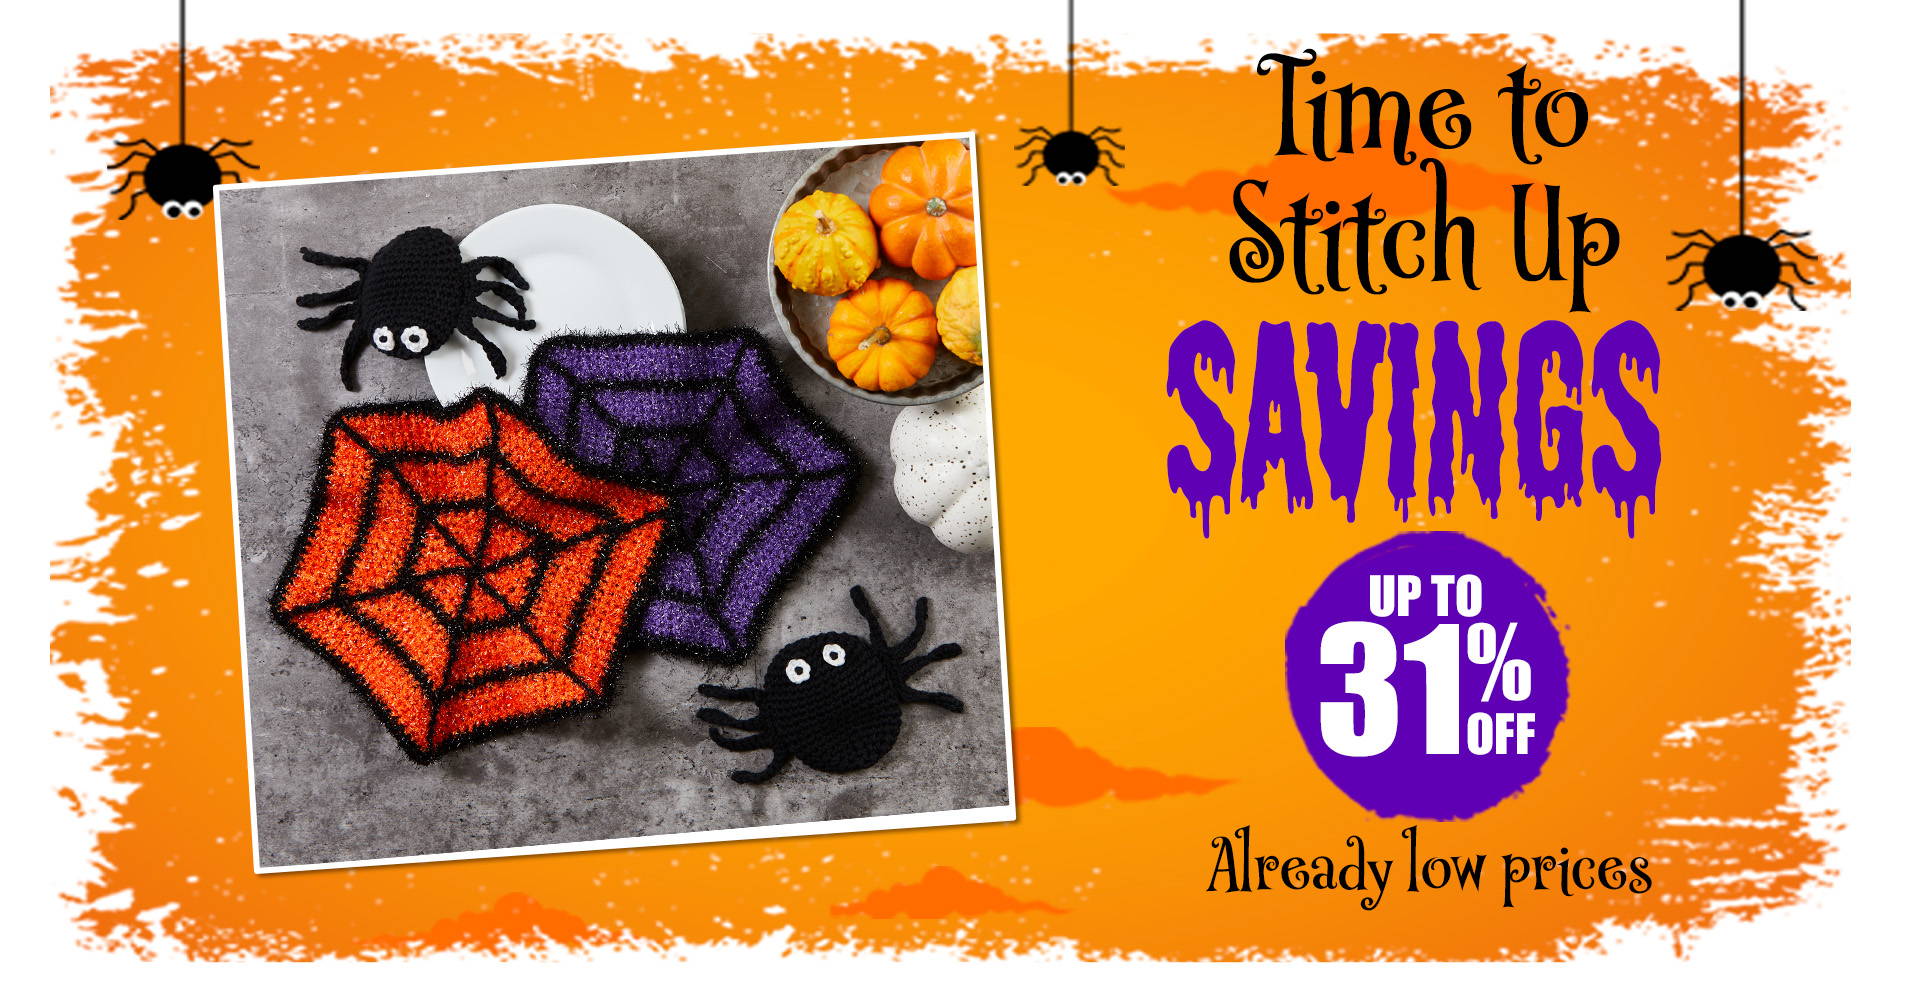 Time to Stitch Up Savings! Image: Herrschners Spider Scrubbies Crochet Yarn Kit.